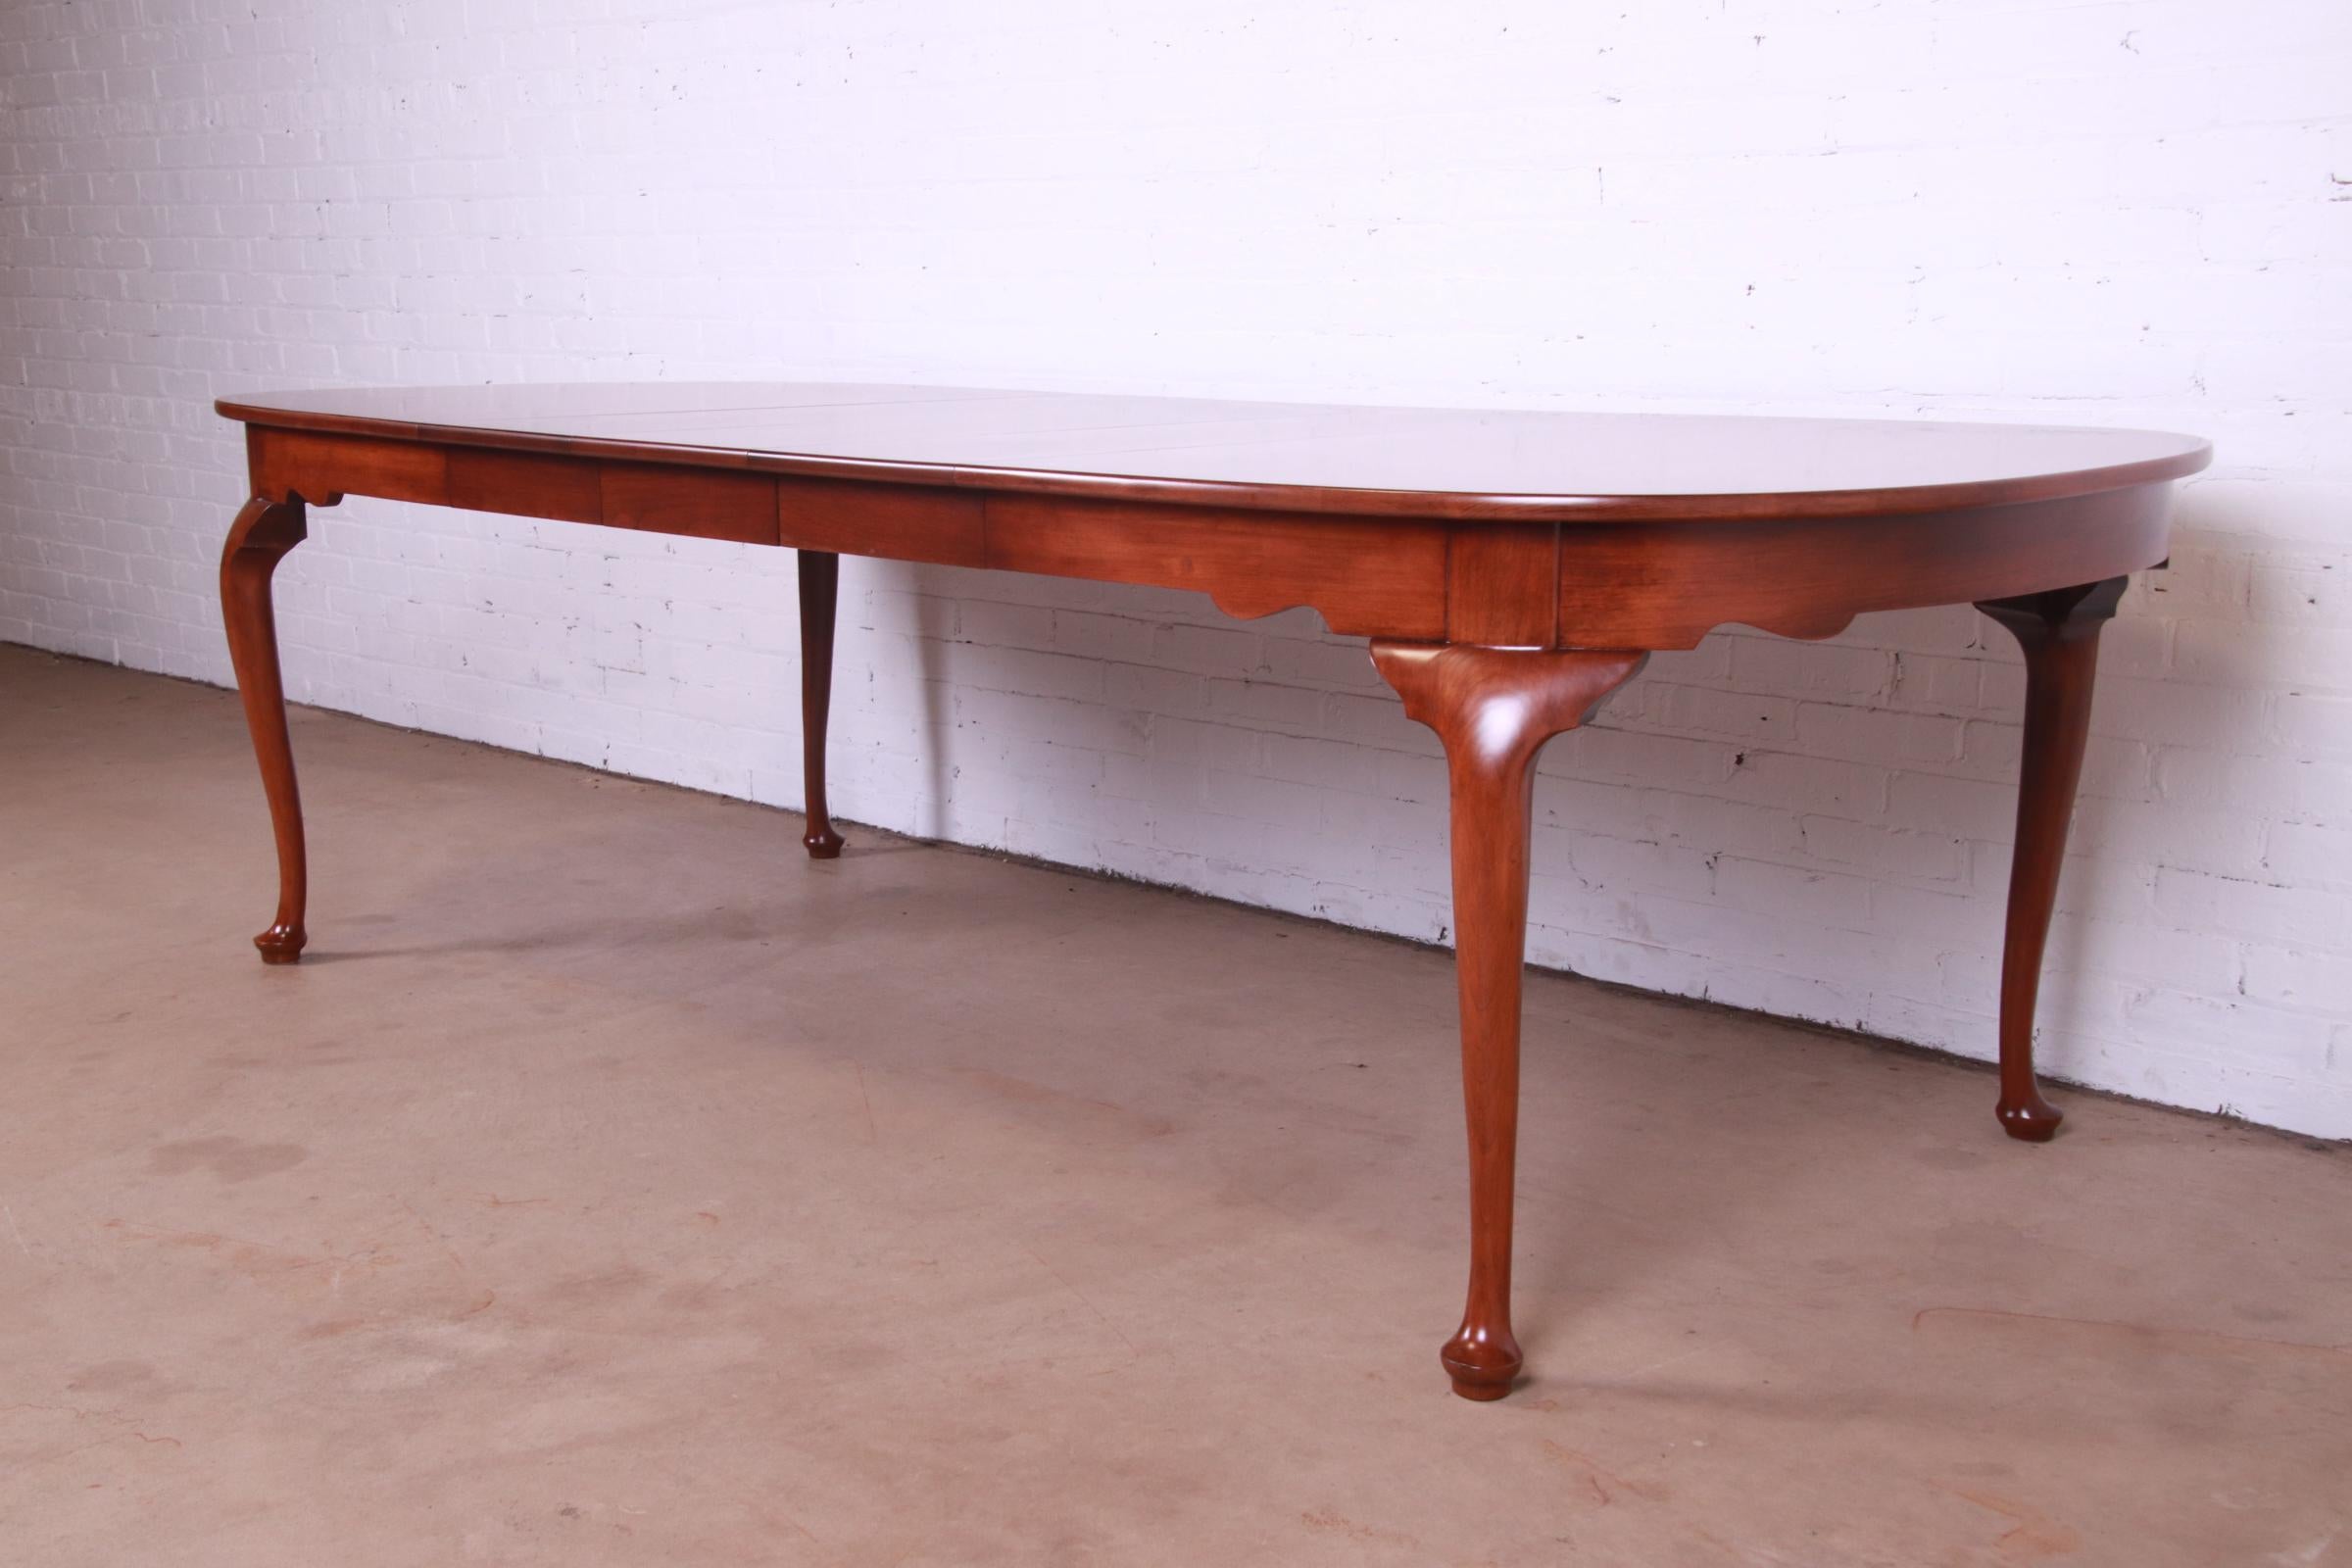 20th Century Henkel Harris Queen Anne Solid Cherry Wood Extension Dining Table